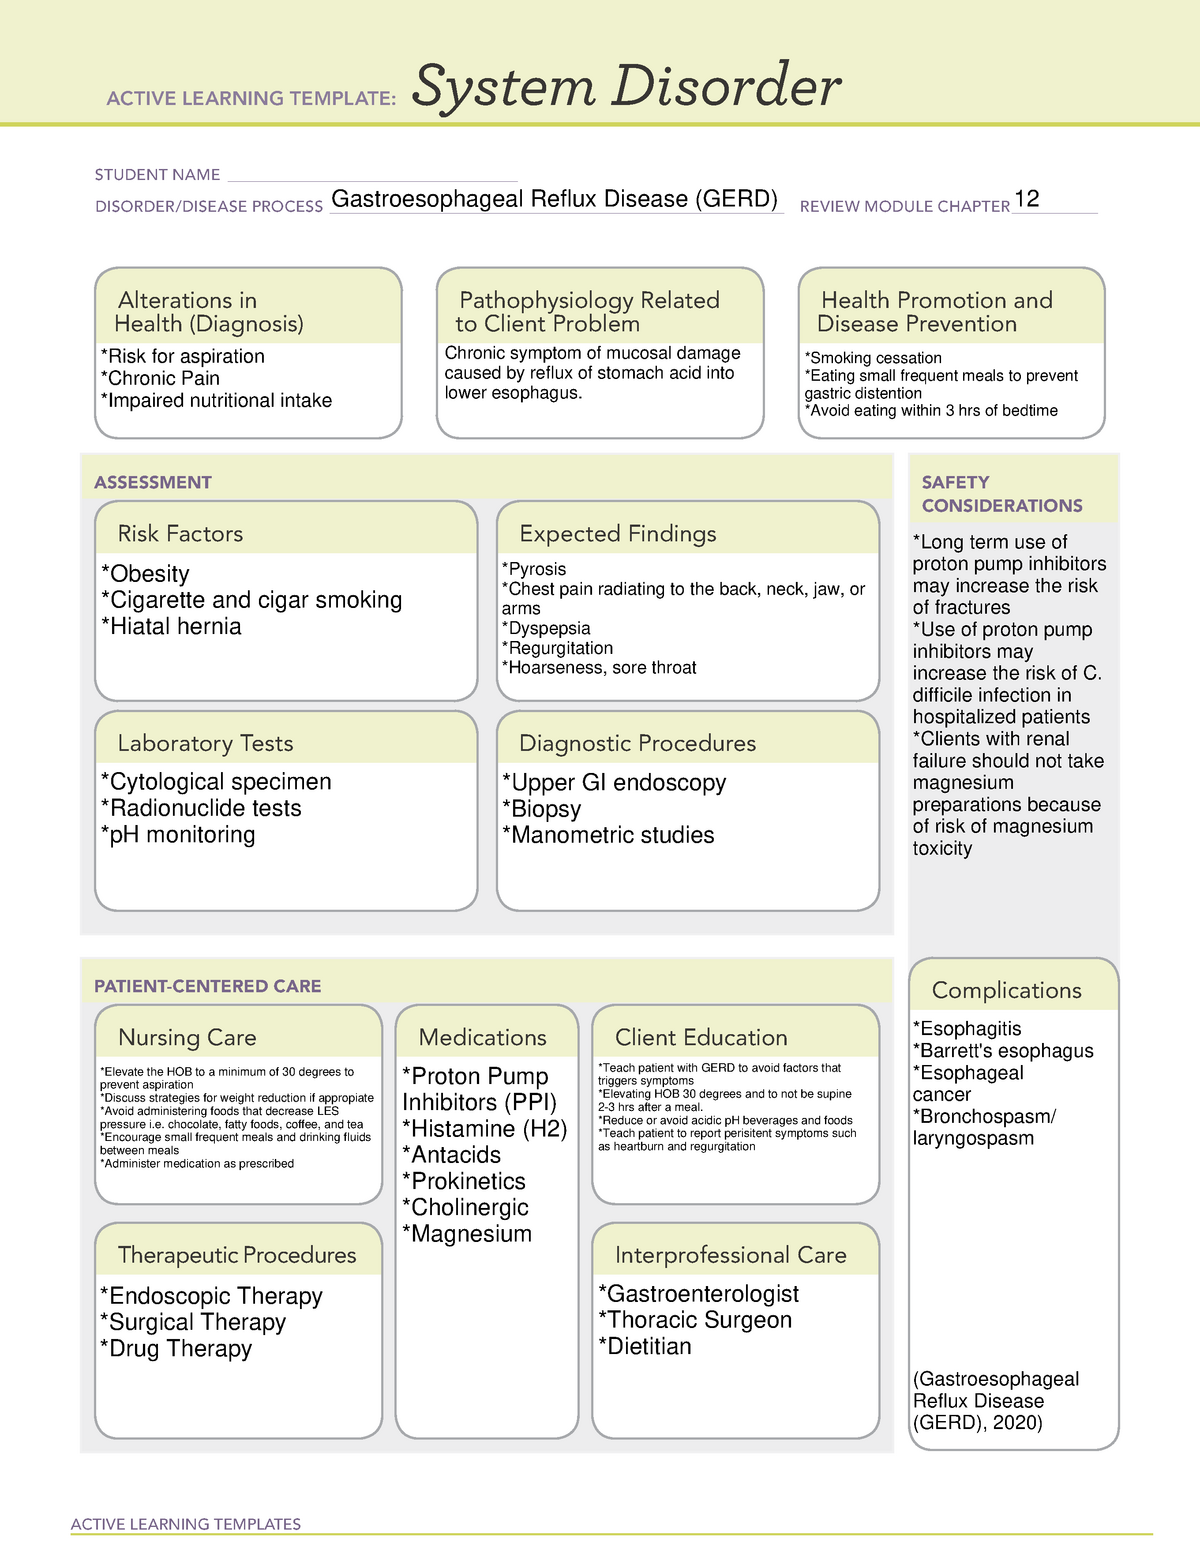 System Disorder GERD ati template - ACTIVE LEARNING TEMPLATES System ...